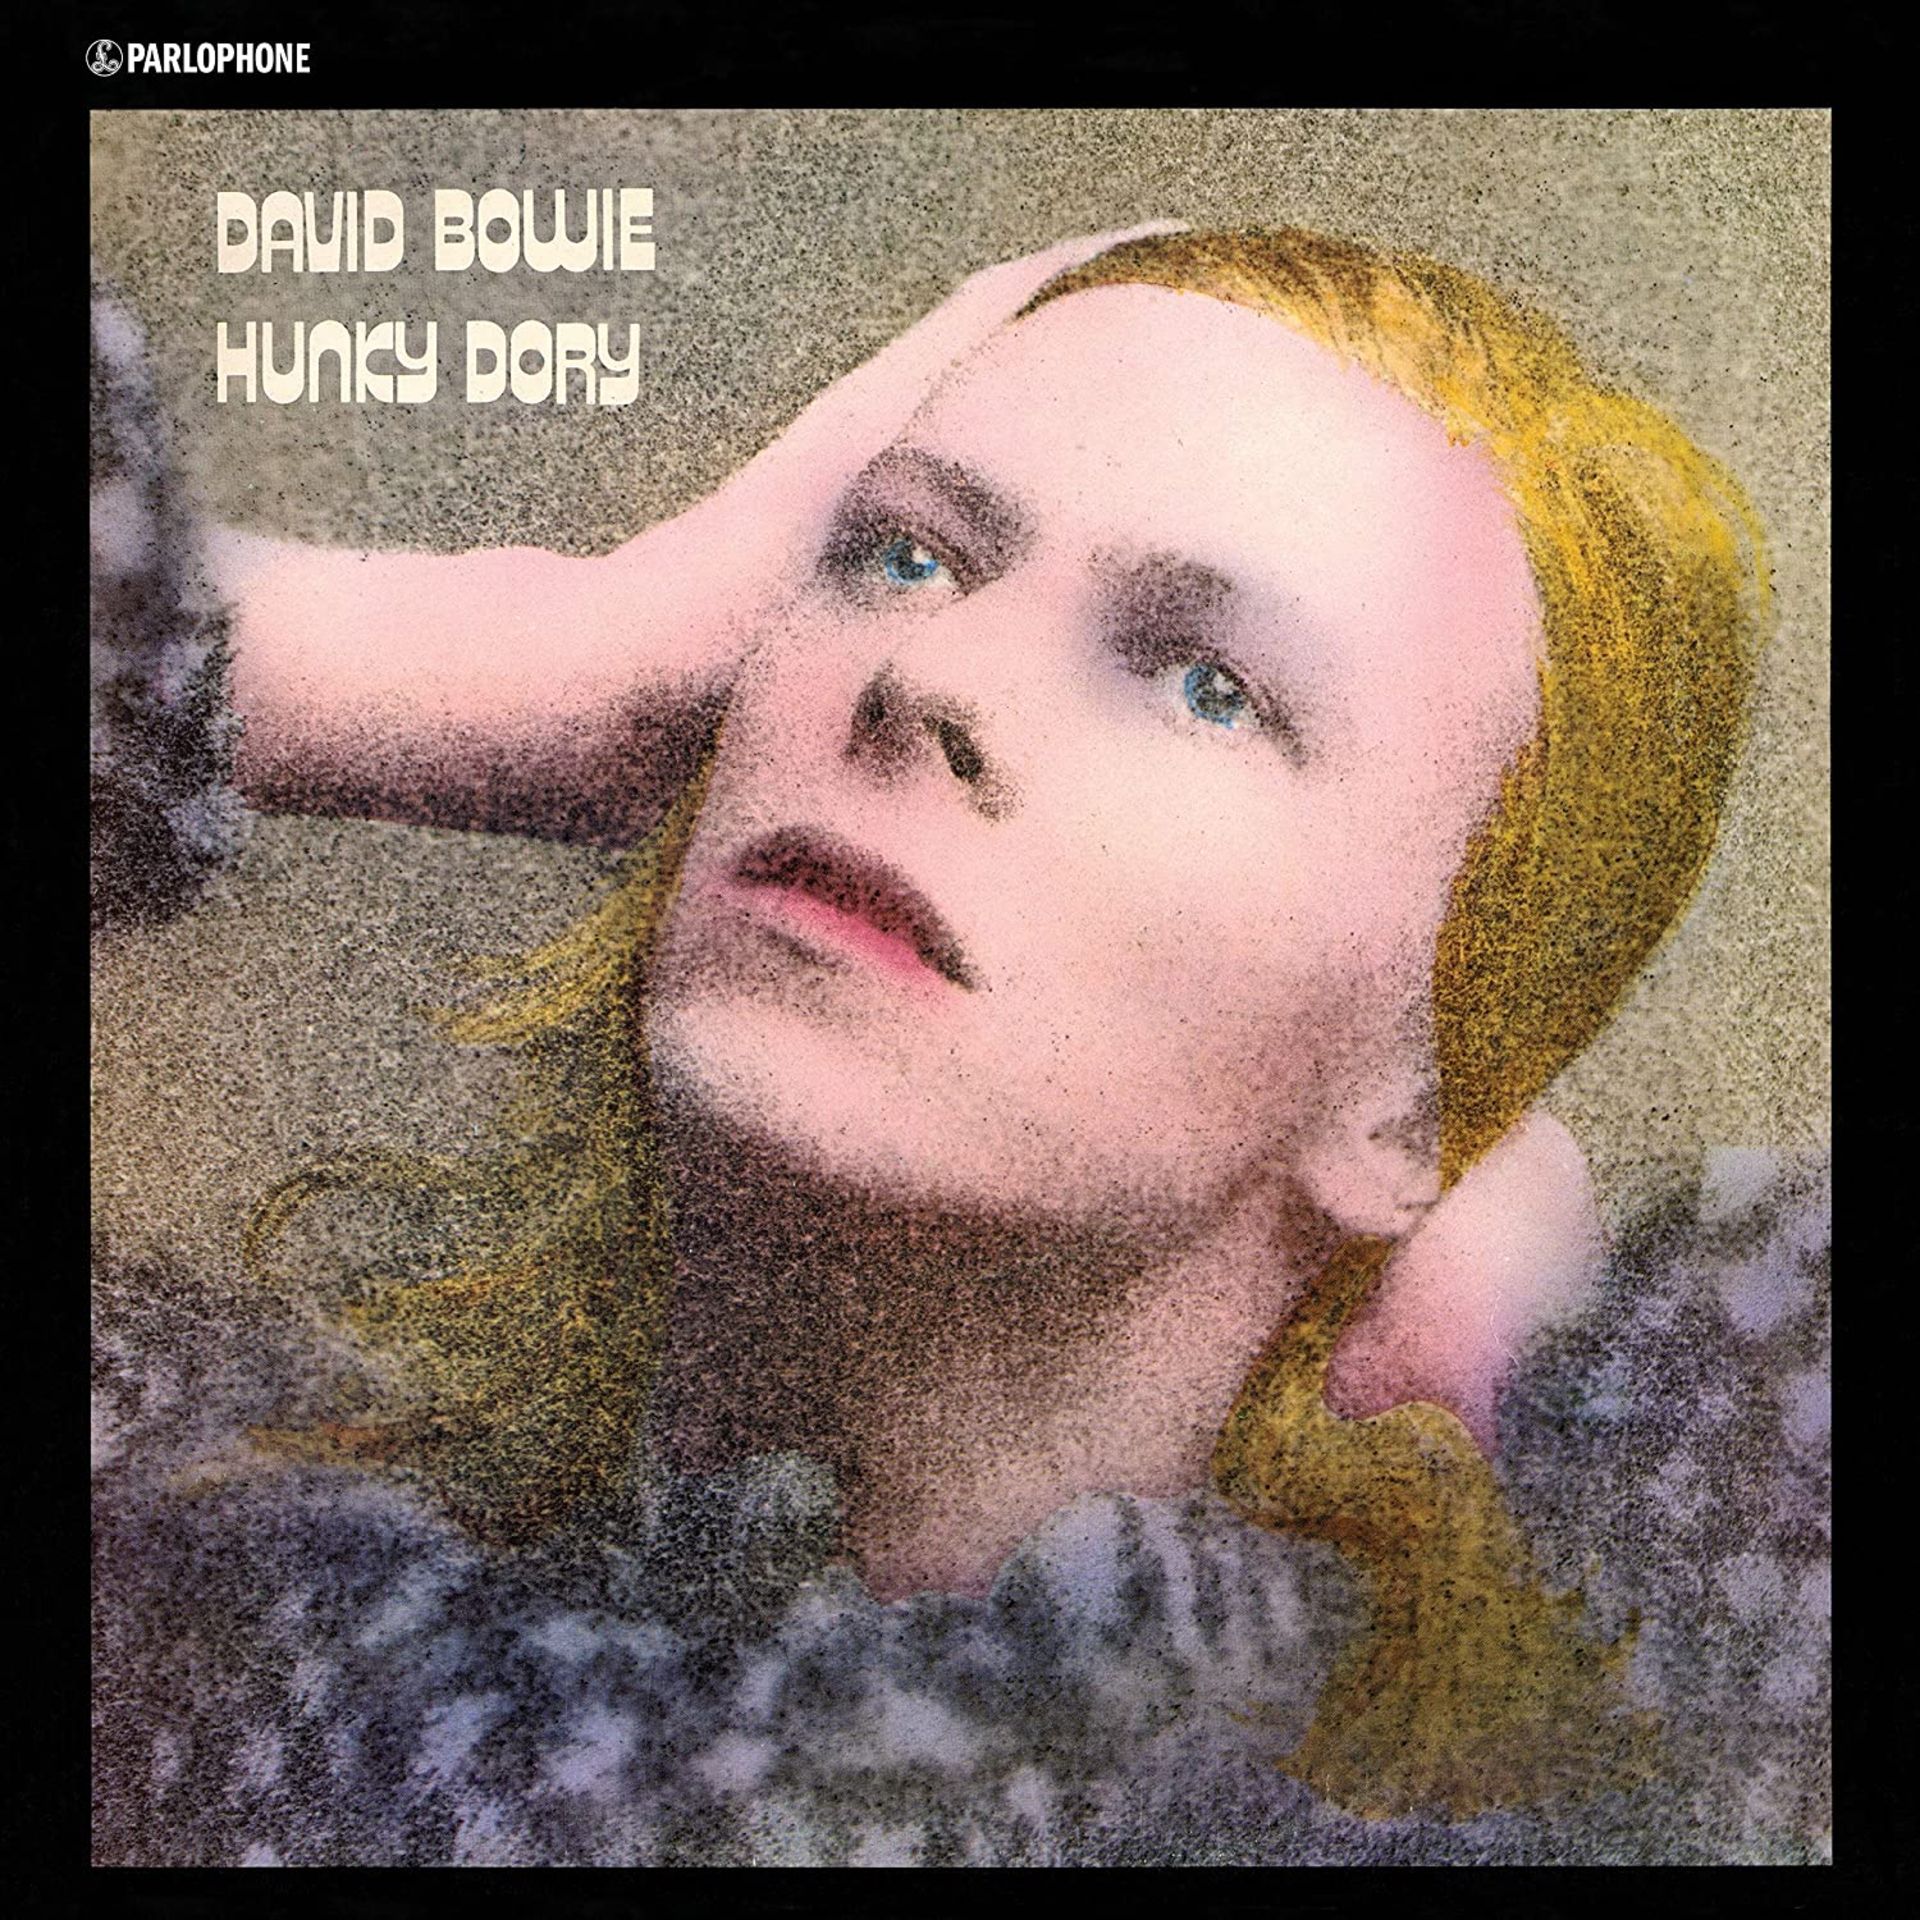 DAVID BOWIE HUNKY DORY VINYL RRP £22Condition ReportAppraisal Available on Request - All Items are